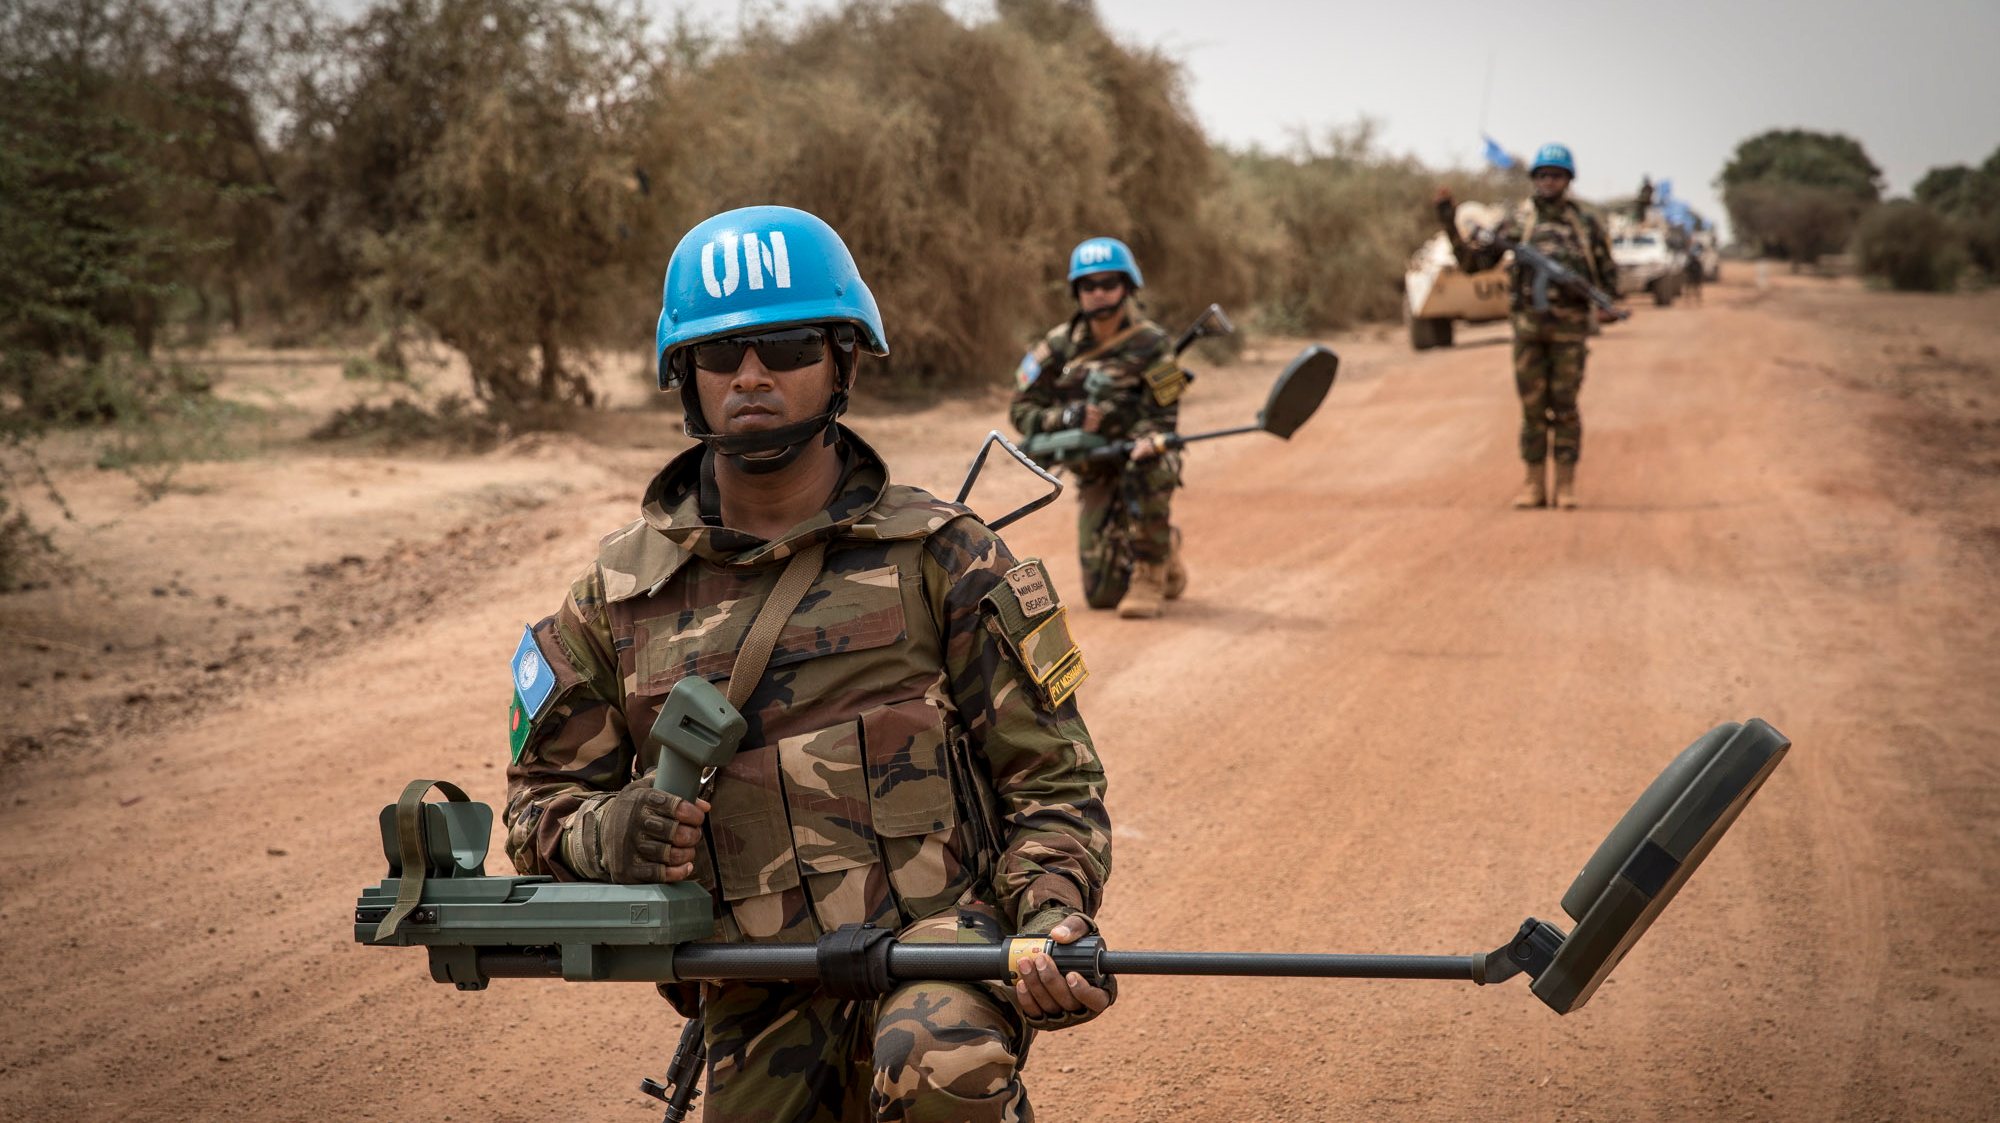 epa07519672 A handout photo made available by MINUSMA, a United Nations peacekeeping force in Mali, showing UN peacekeeping soldiers with mine-detecting devices walking ahead of a convoy with armoured vehicles on patrol at a undisclosed location in Mali, 27 March 2019. Reports on 21 April 2019 state one UN peacekeeper was killed and four others wounded in an attack 20 April against MINUSMA forces in Mali&#039;s Mopti region. MINUSMA said in a statement that a UN convoy was attacked by using an improvised explosive device, also called IED. UN confirmed those dead and injured were from Egypt. One attacker was reportedly killed while eight others were taken prisoners.  EPA/MINUSMA HANDOUT  HANDOUT EDITORIAL USE ONLY/NO SALES